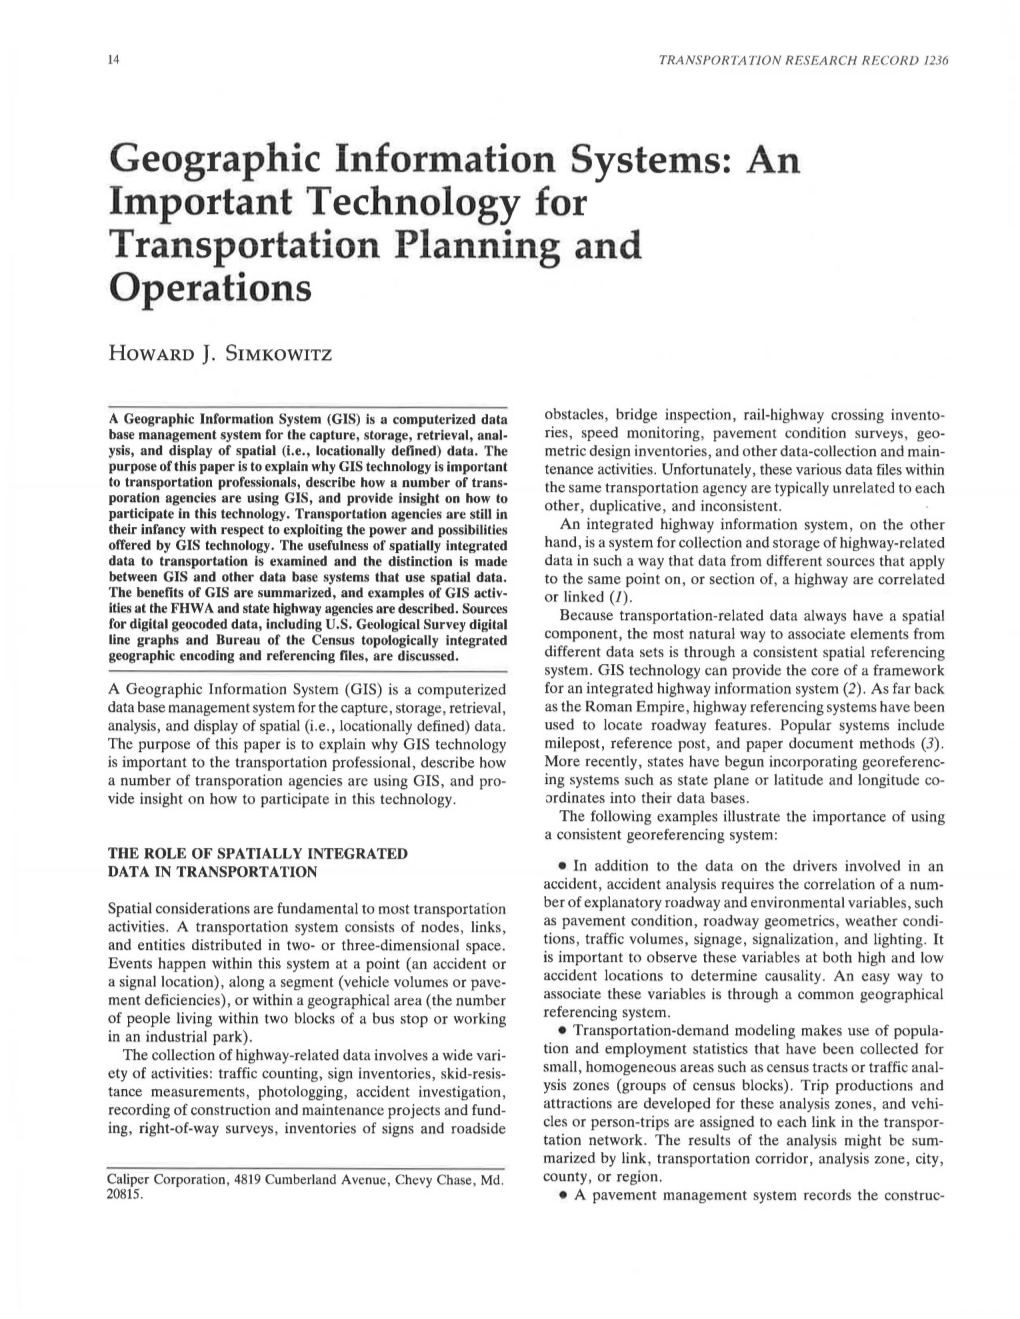 Geographic Information Systems: an Important Technology for Transportation Planning and Operations